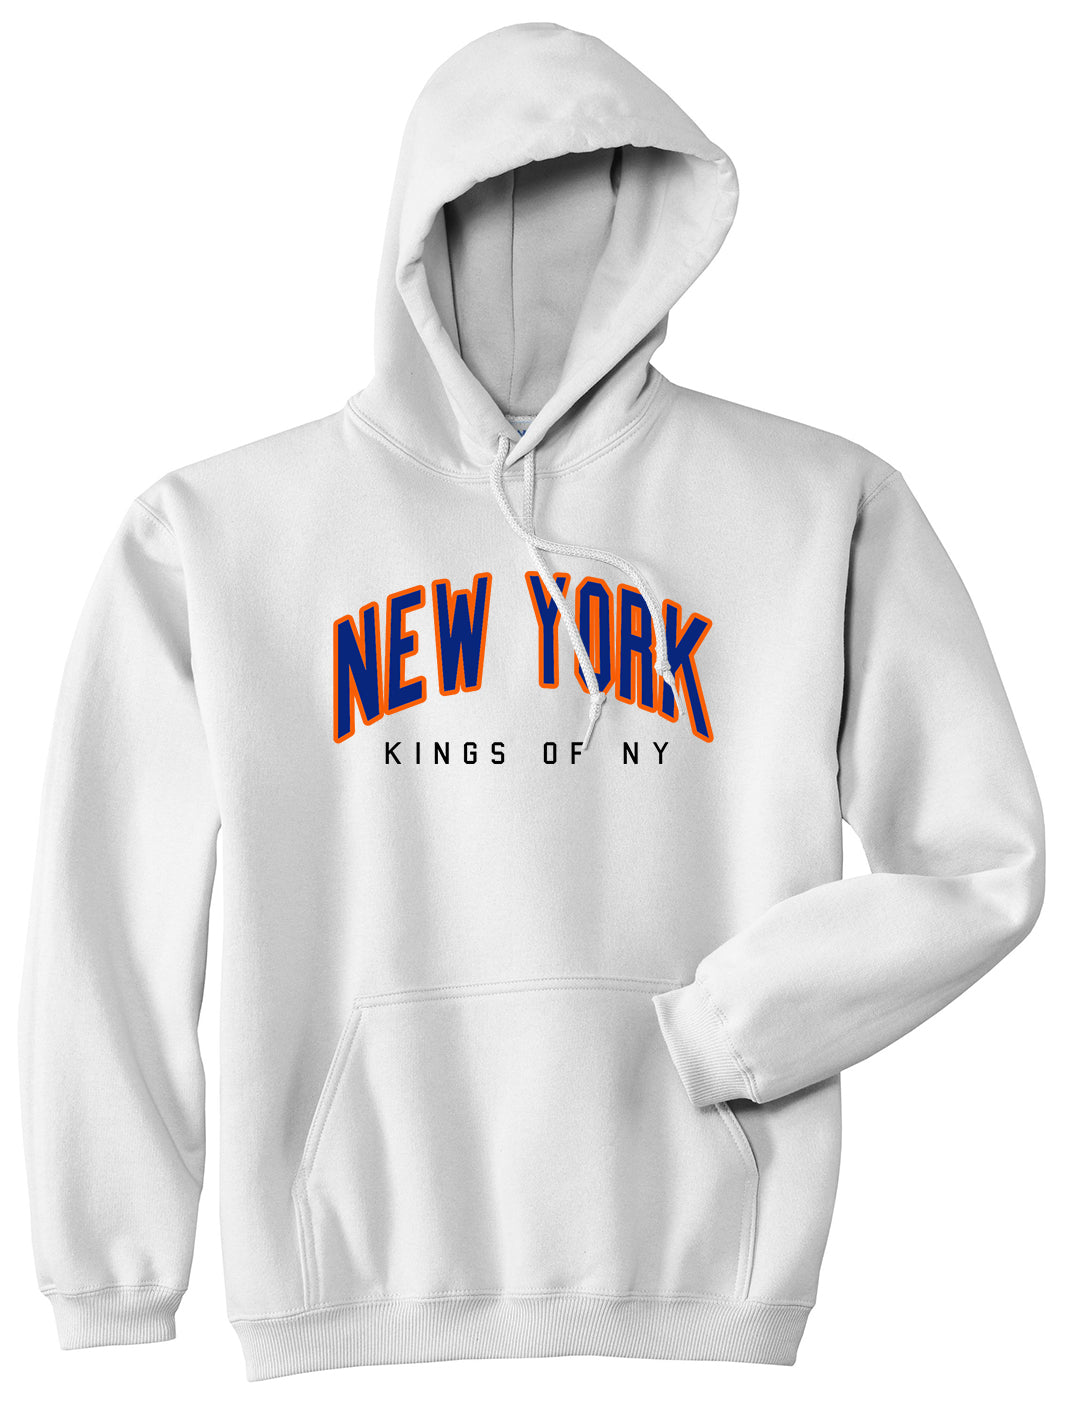 New York Blue And Orange Mens Pullover Hoodie White by Kings Of NY